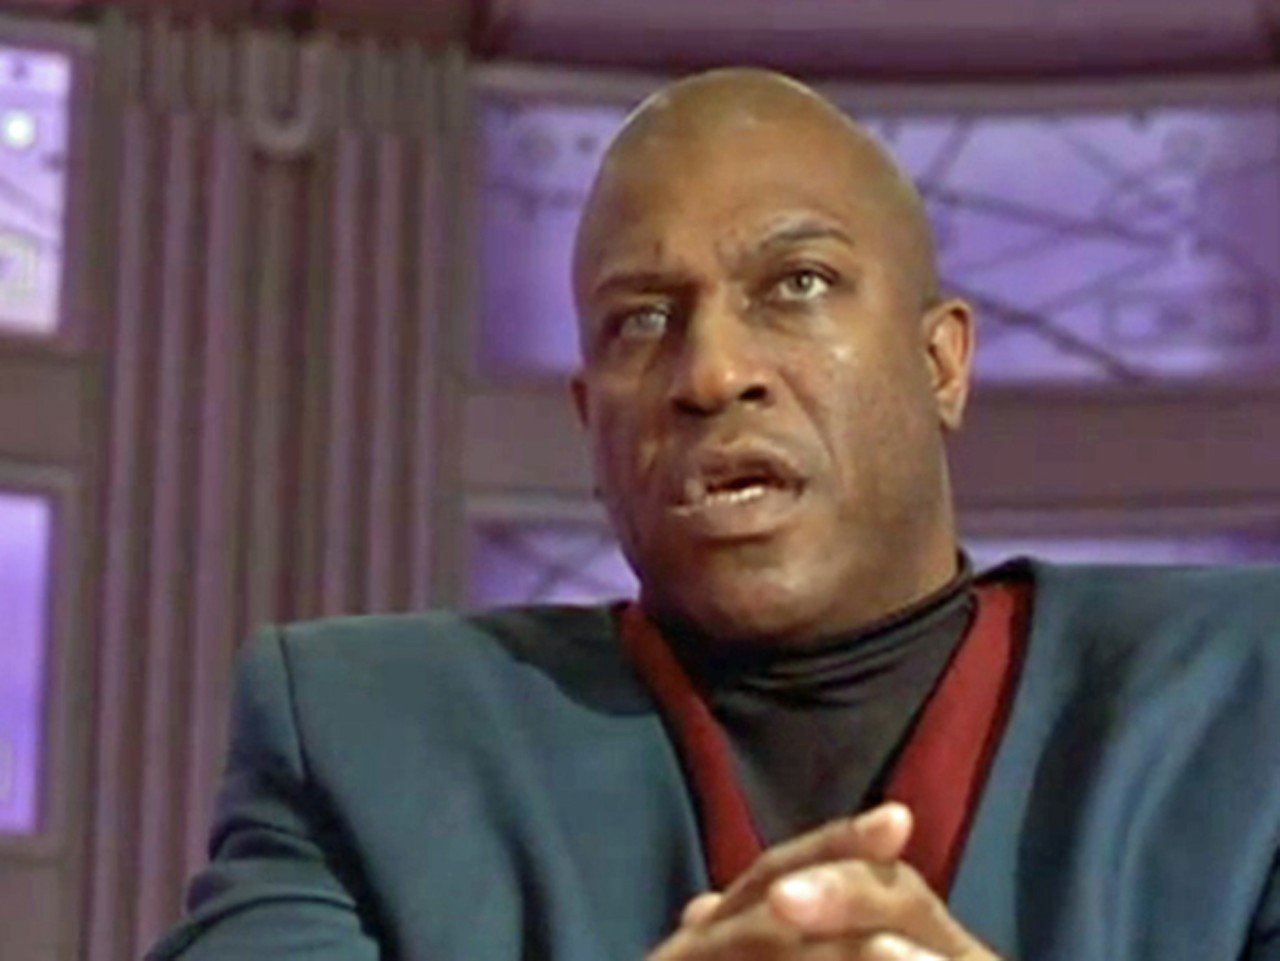 Tommy "Tiny" Lister as President Lindberg in The Fifth Element (1997)
President Lindberg will give you twenty goddamn seconds to make your case about why you shouldn't open fire immediately on mysterious civilizations.